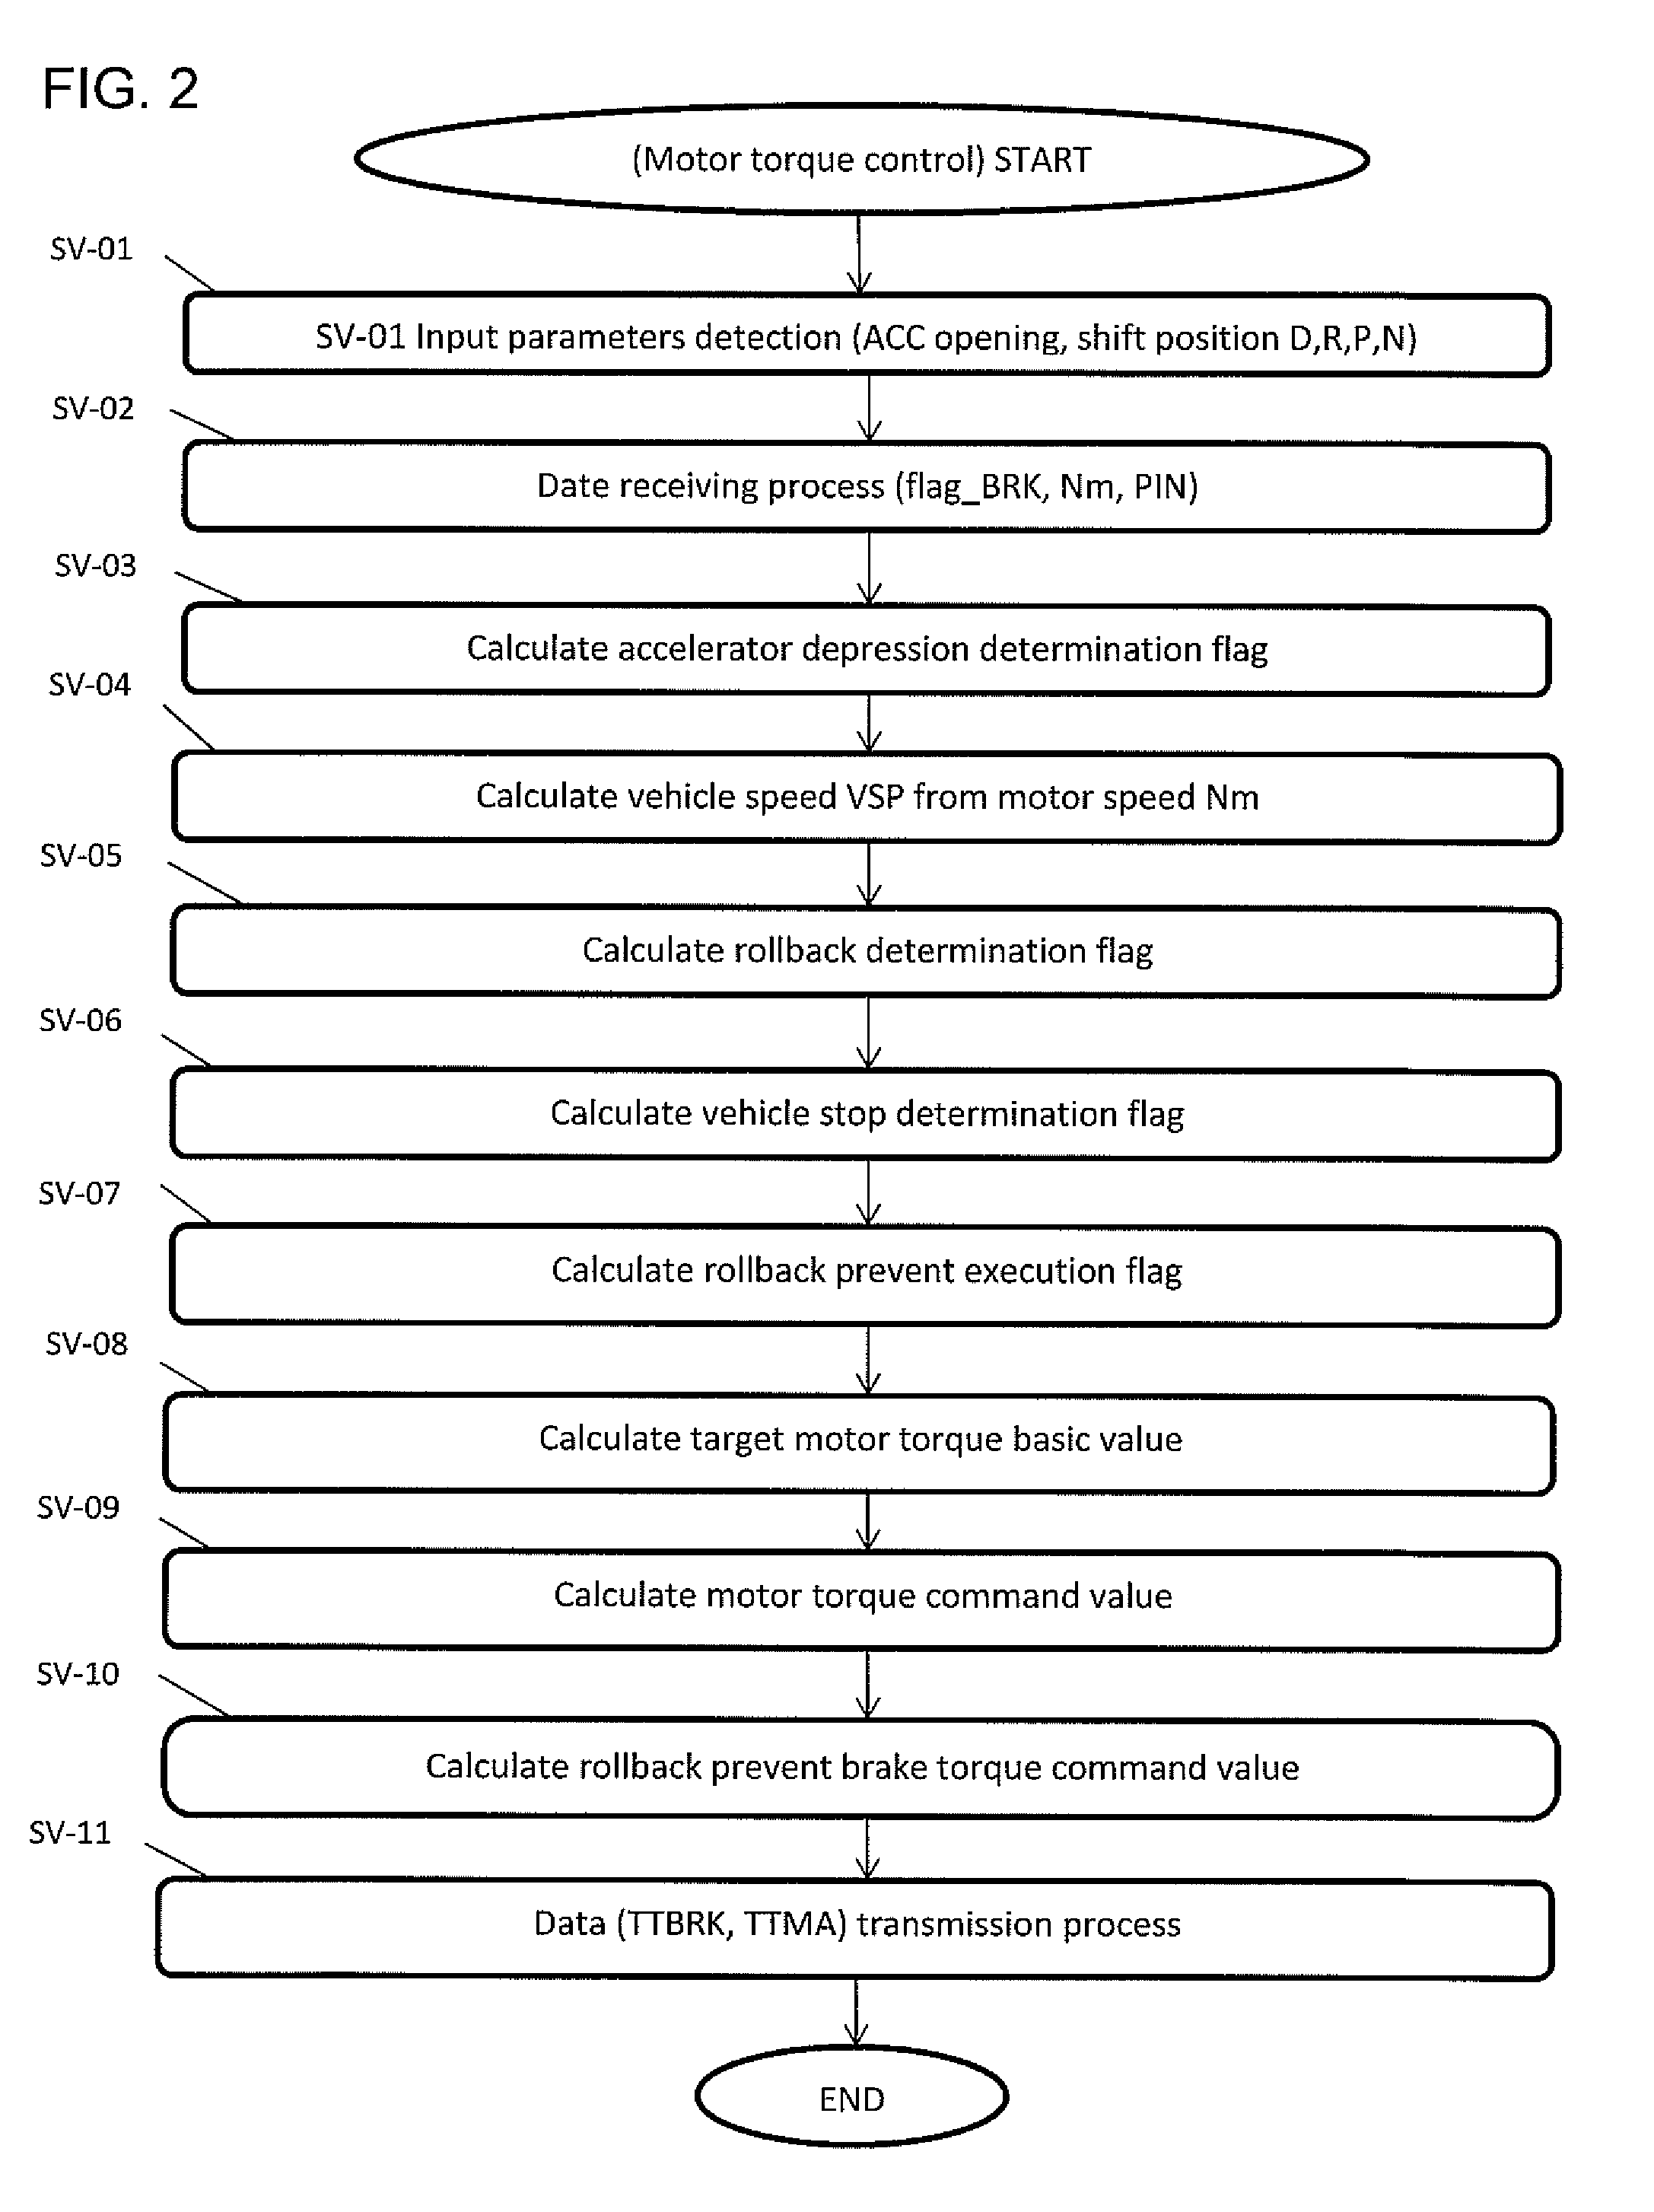 Control apparatus for preventing rolling back of an electrically driven vehicle upon start-up thereof